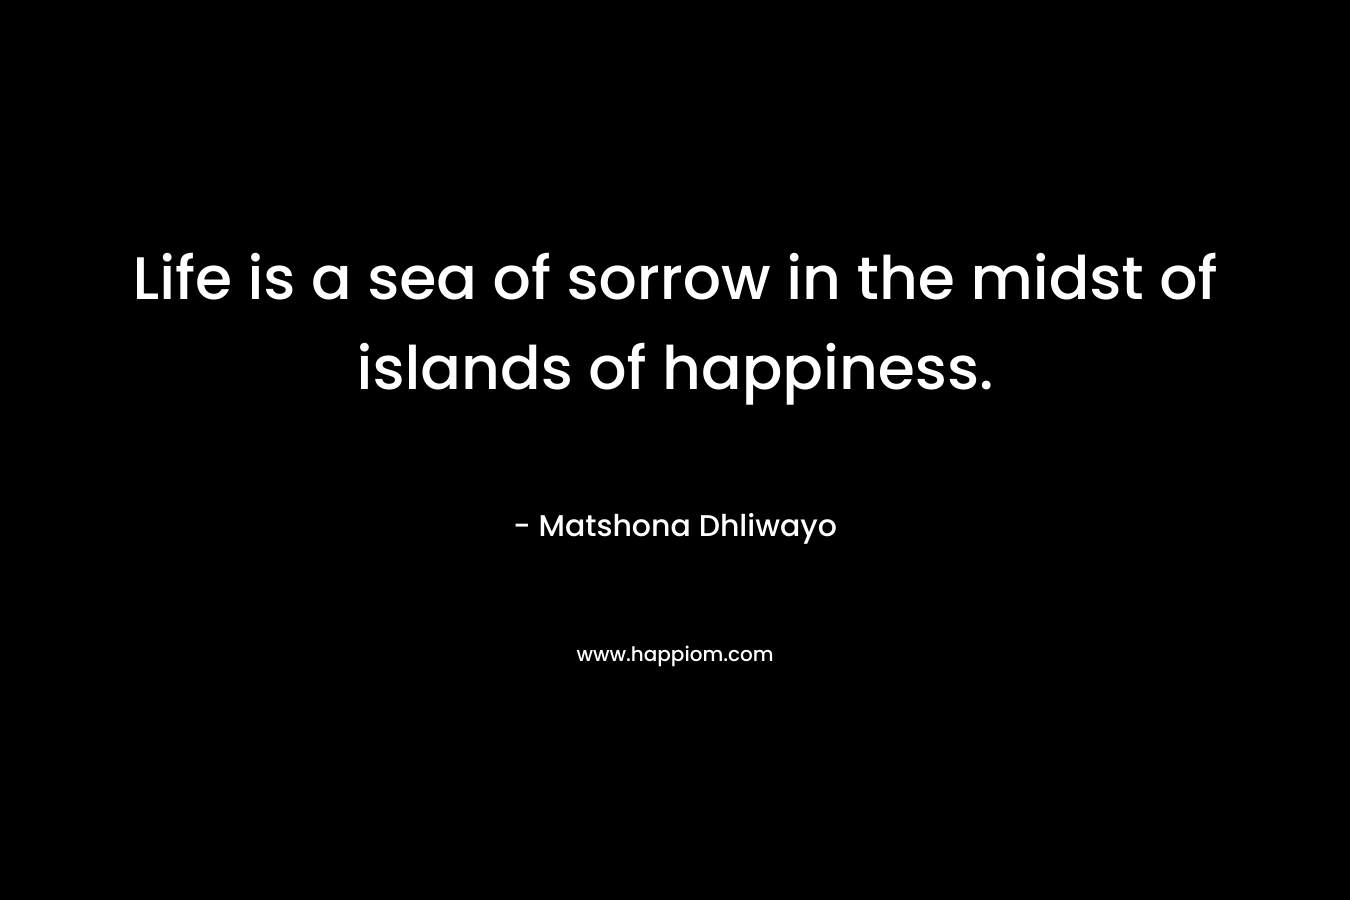 Life is a sea of sorrow in the midst of islands of happiness.